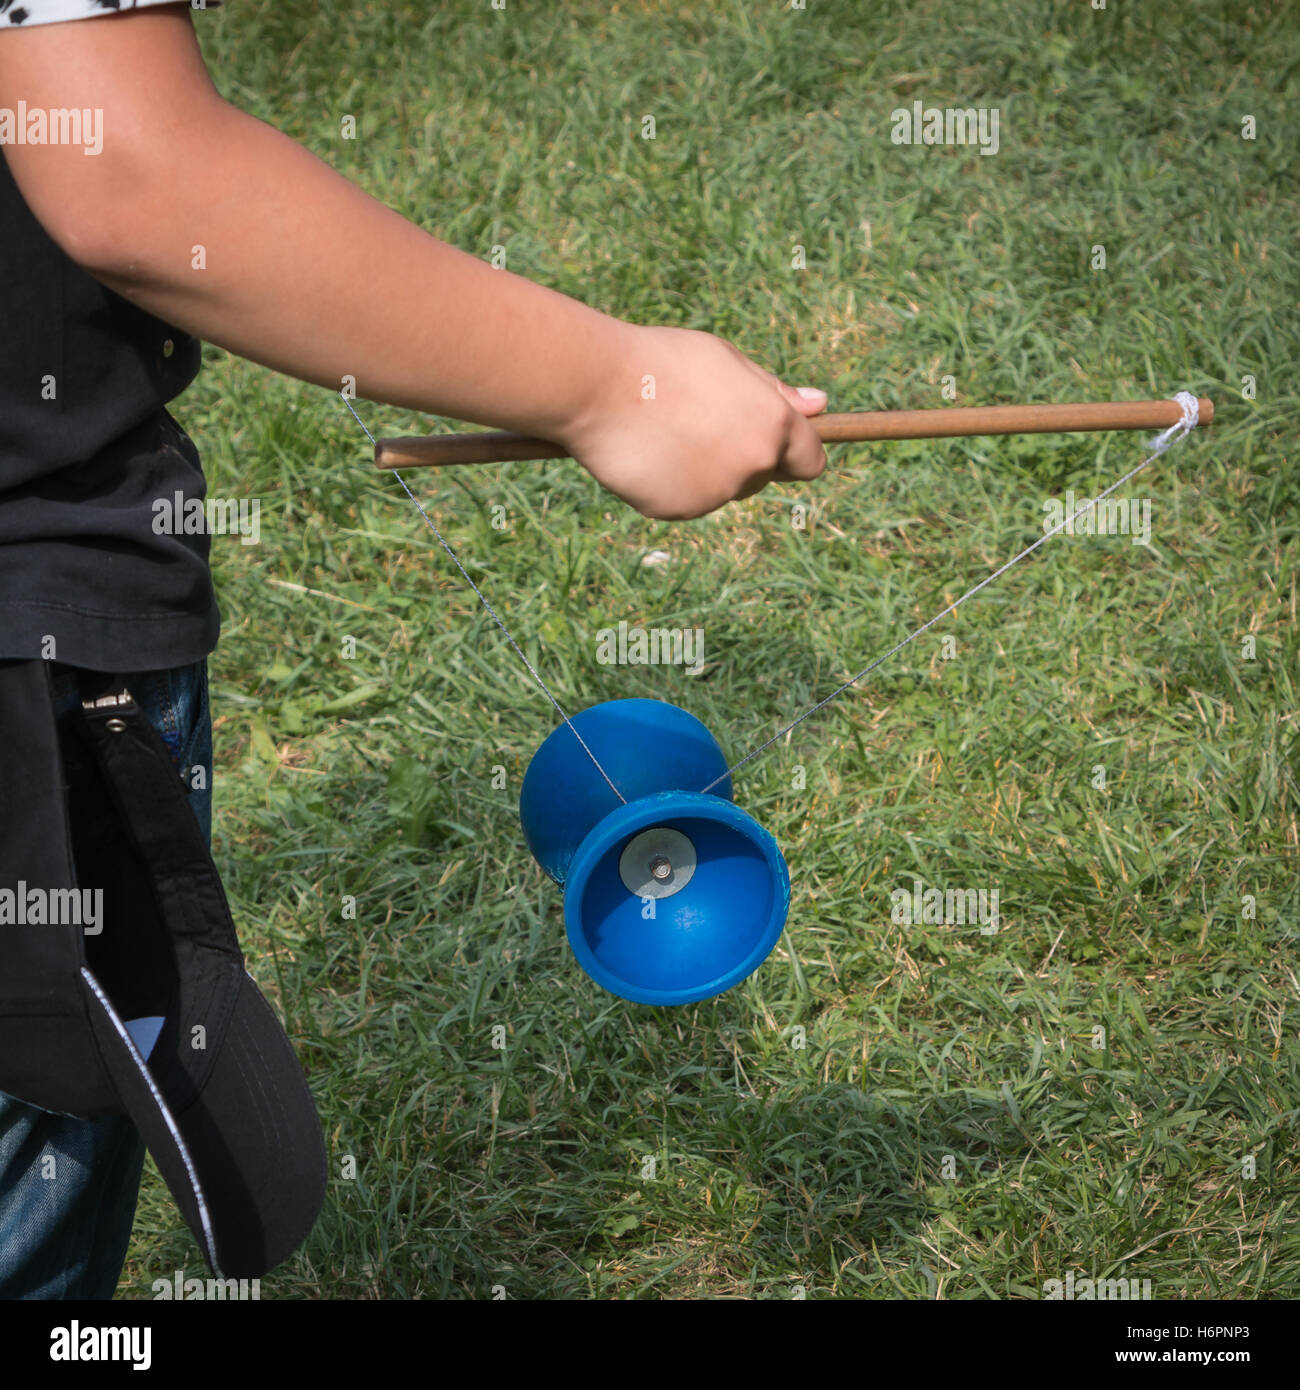 Diabolo Plastic Chinese Toy, Child With Yoyo with Rope and Sticks Stock  Photo - Alamy